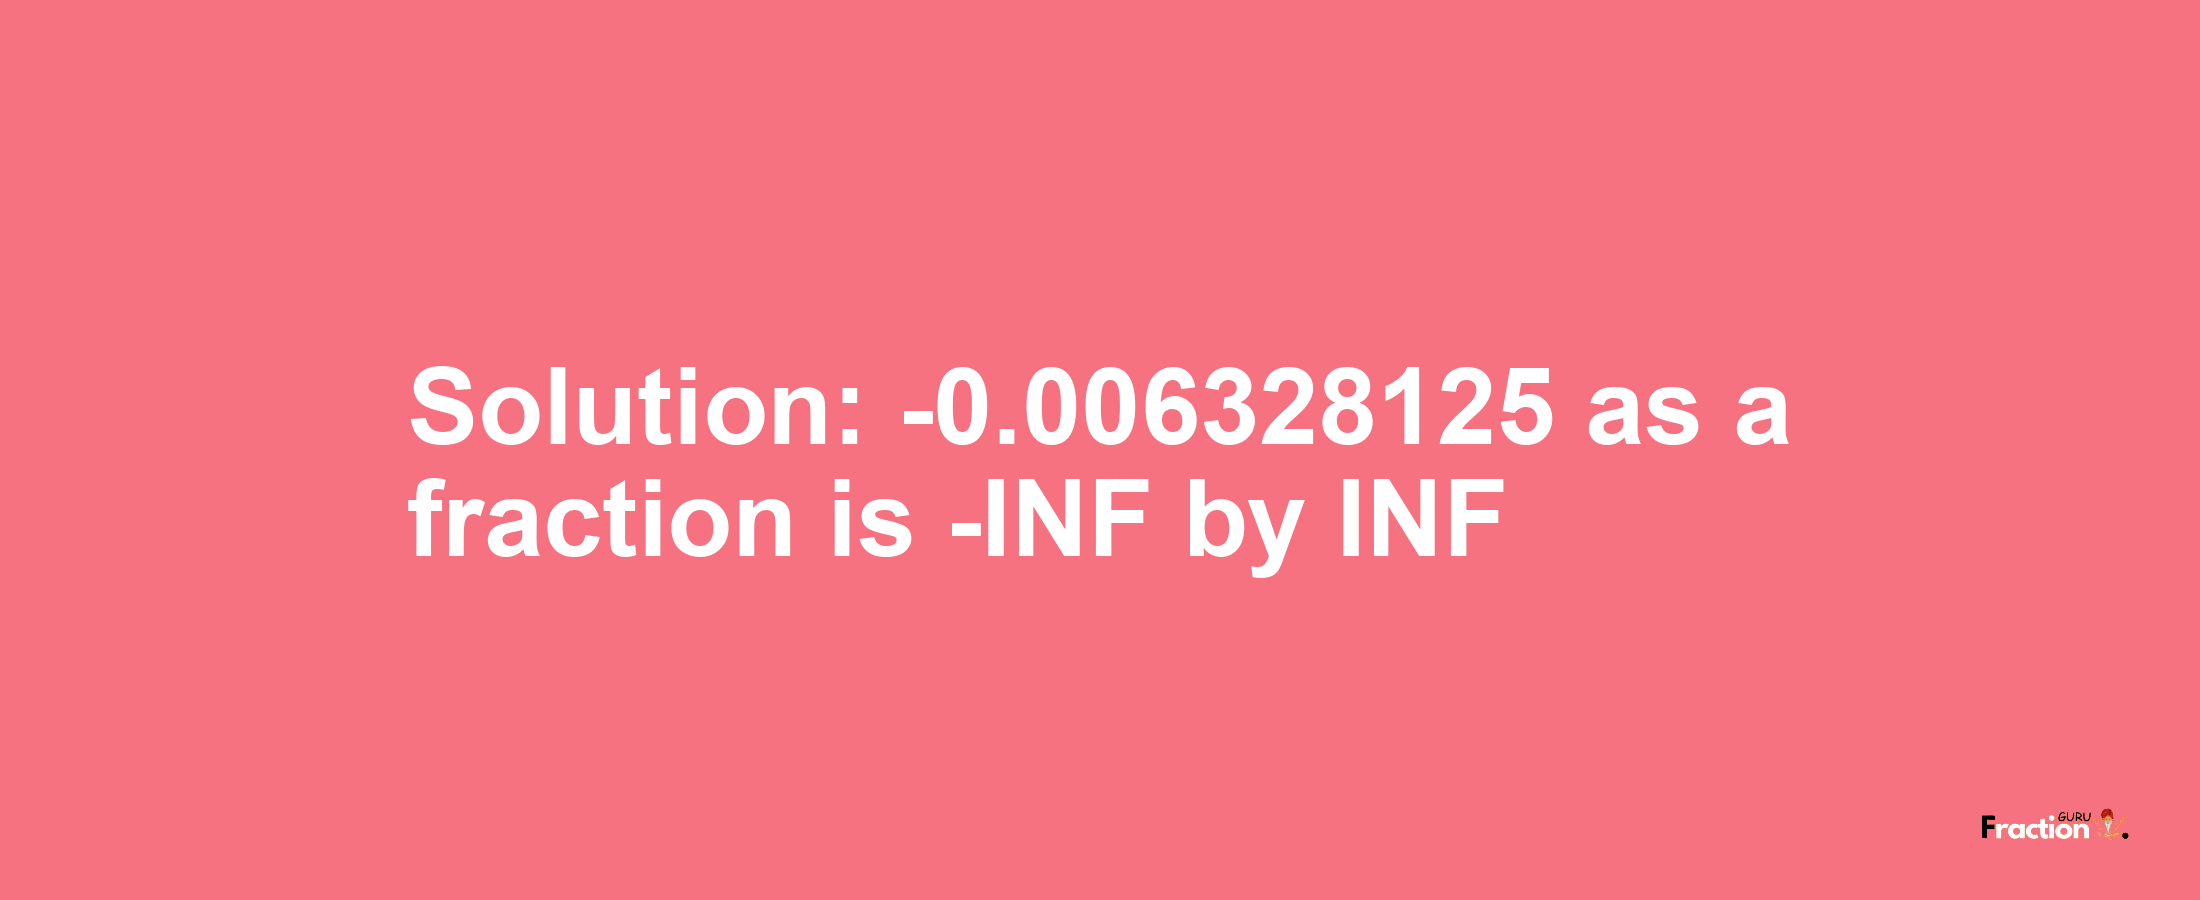 Solution:-0.006328125 as a fraction is -INF/INF